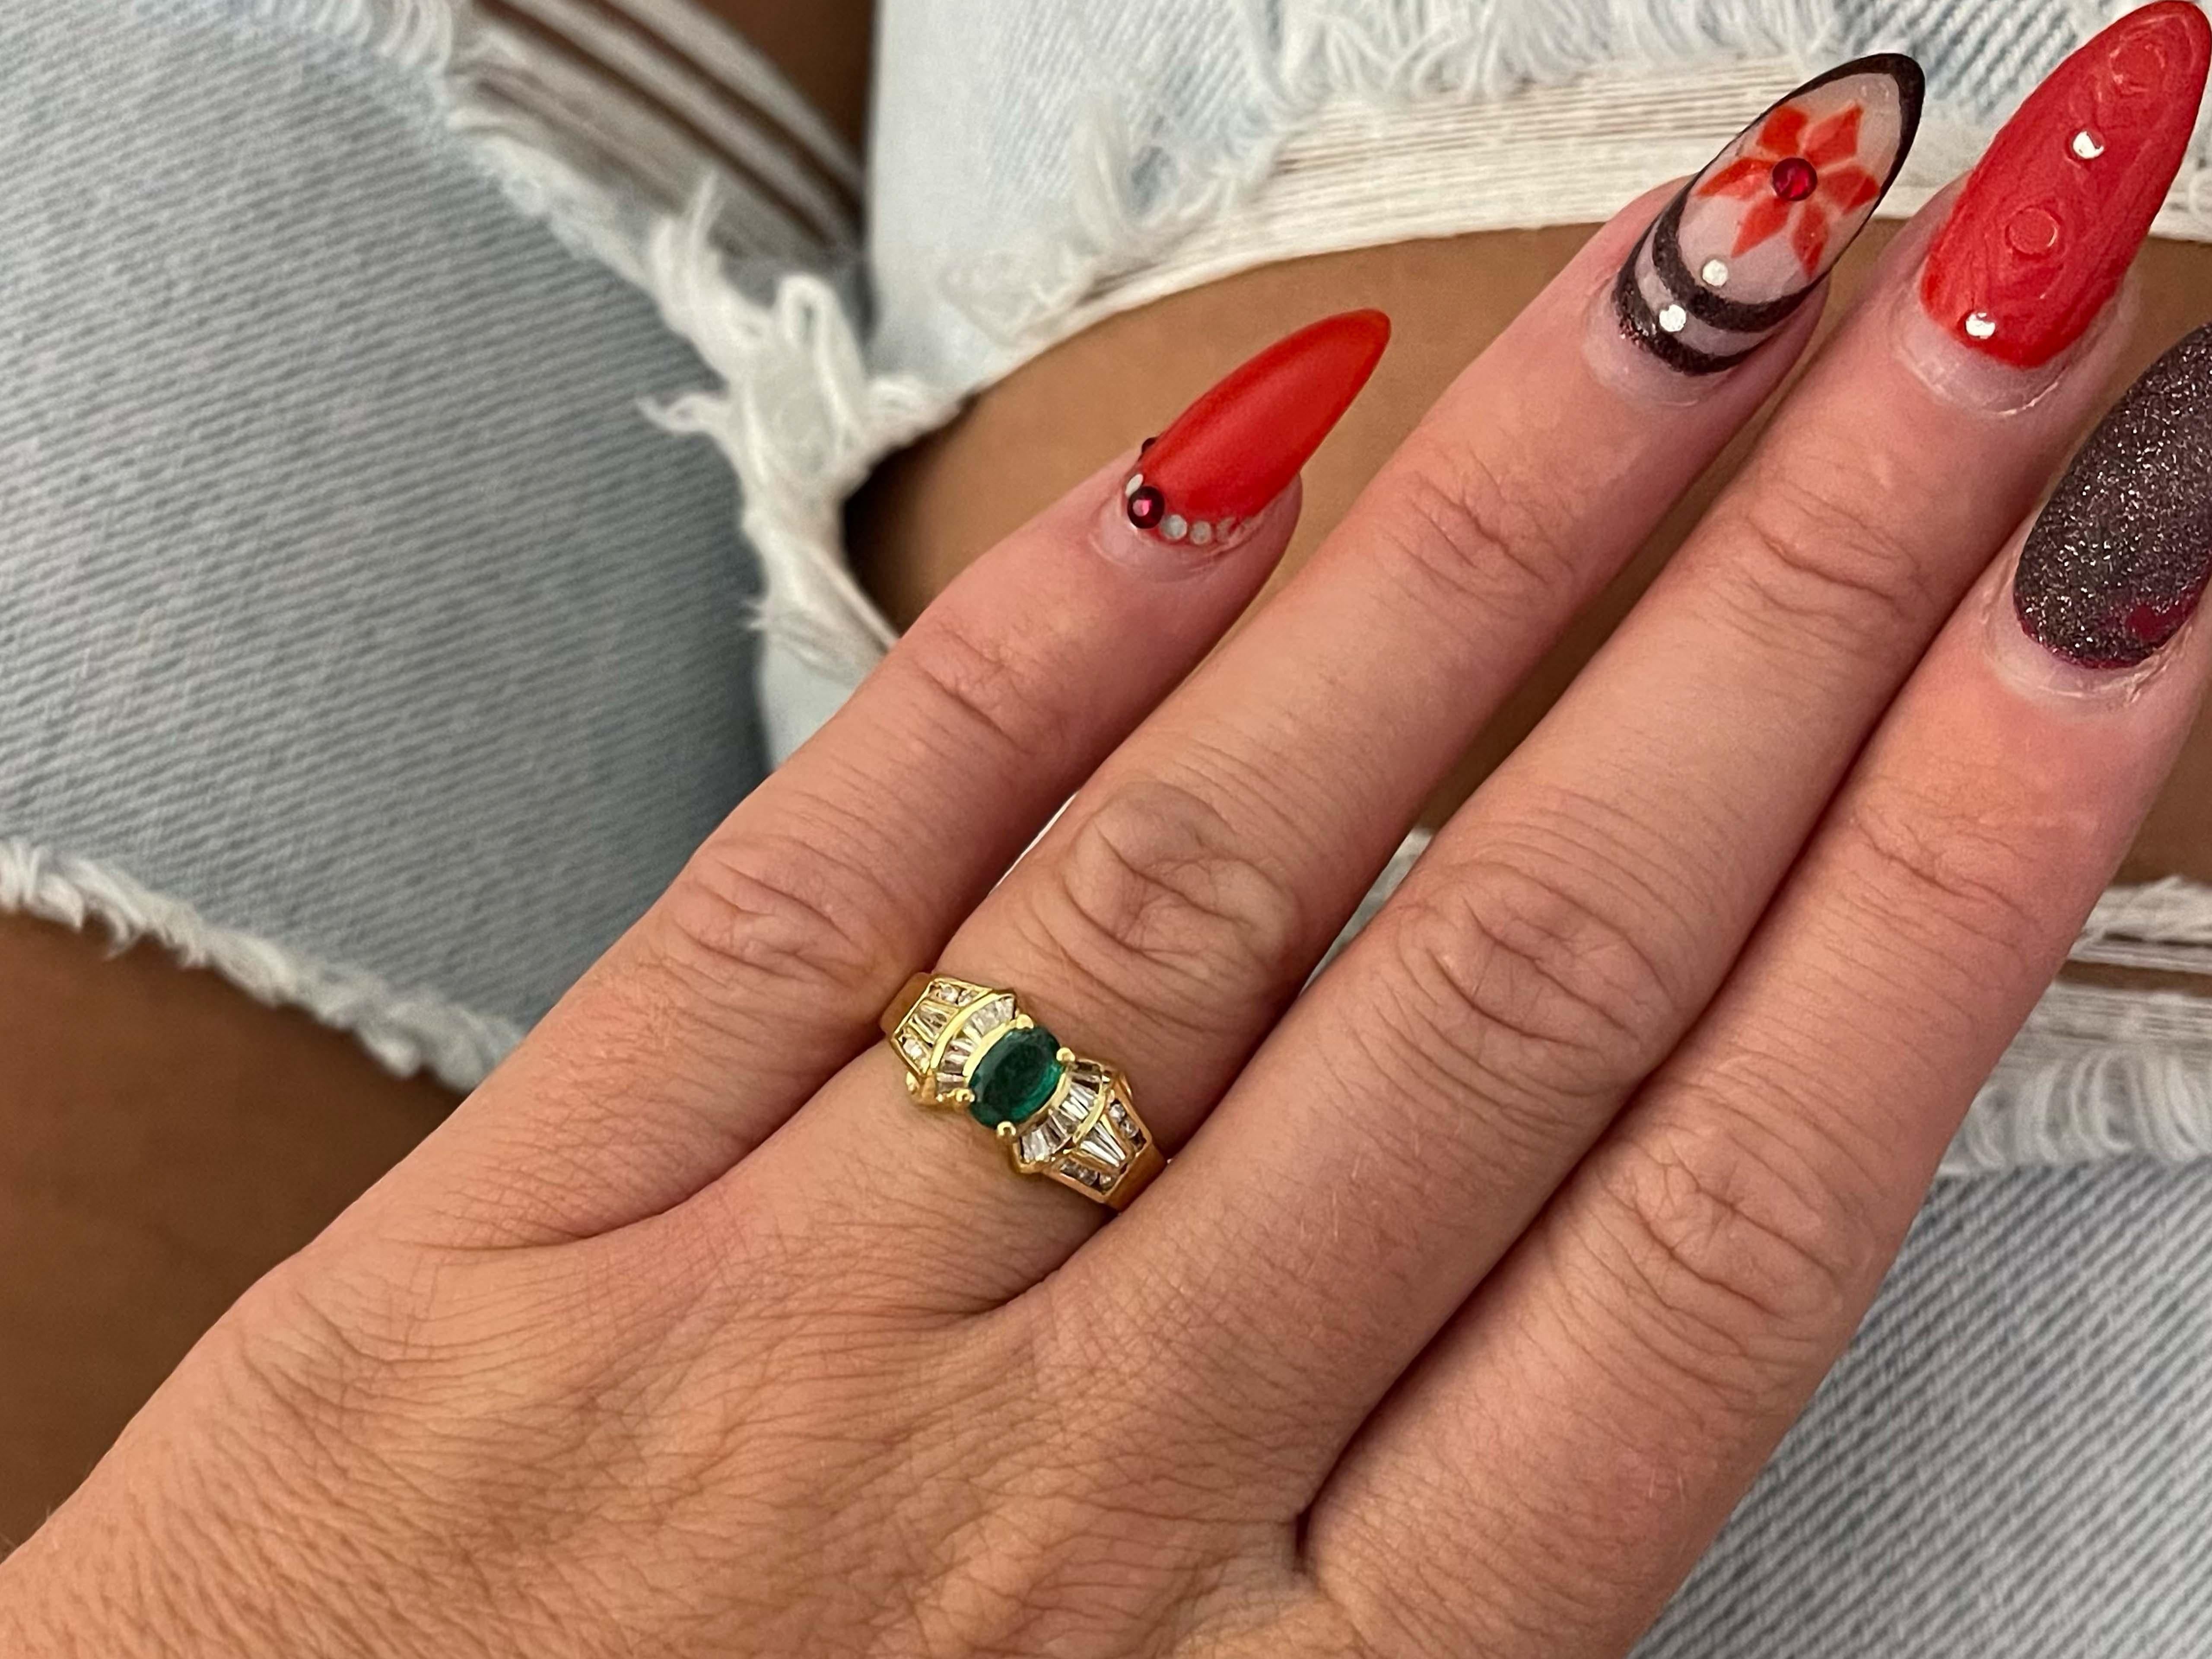 Item Specifications:

Metal: 14K Yellow Gold

Style: Statement Ring

Ring Size: 5.5 (resizing available for a fee)

Total Weight: 3.4 Grams

Ring Height: 8.32 mm

Gemstone Specifications:

Gemstone: 1 Green Emerald

Shape: Oval

Emerald